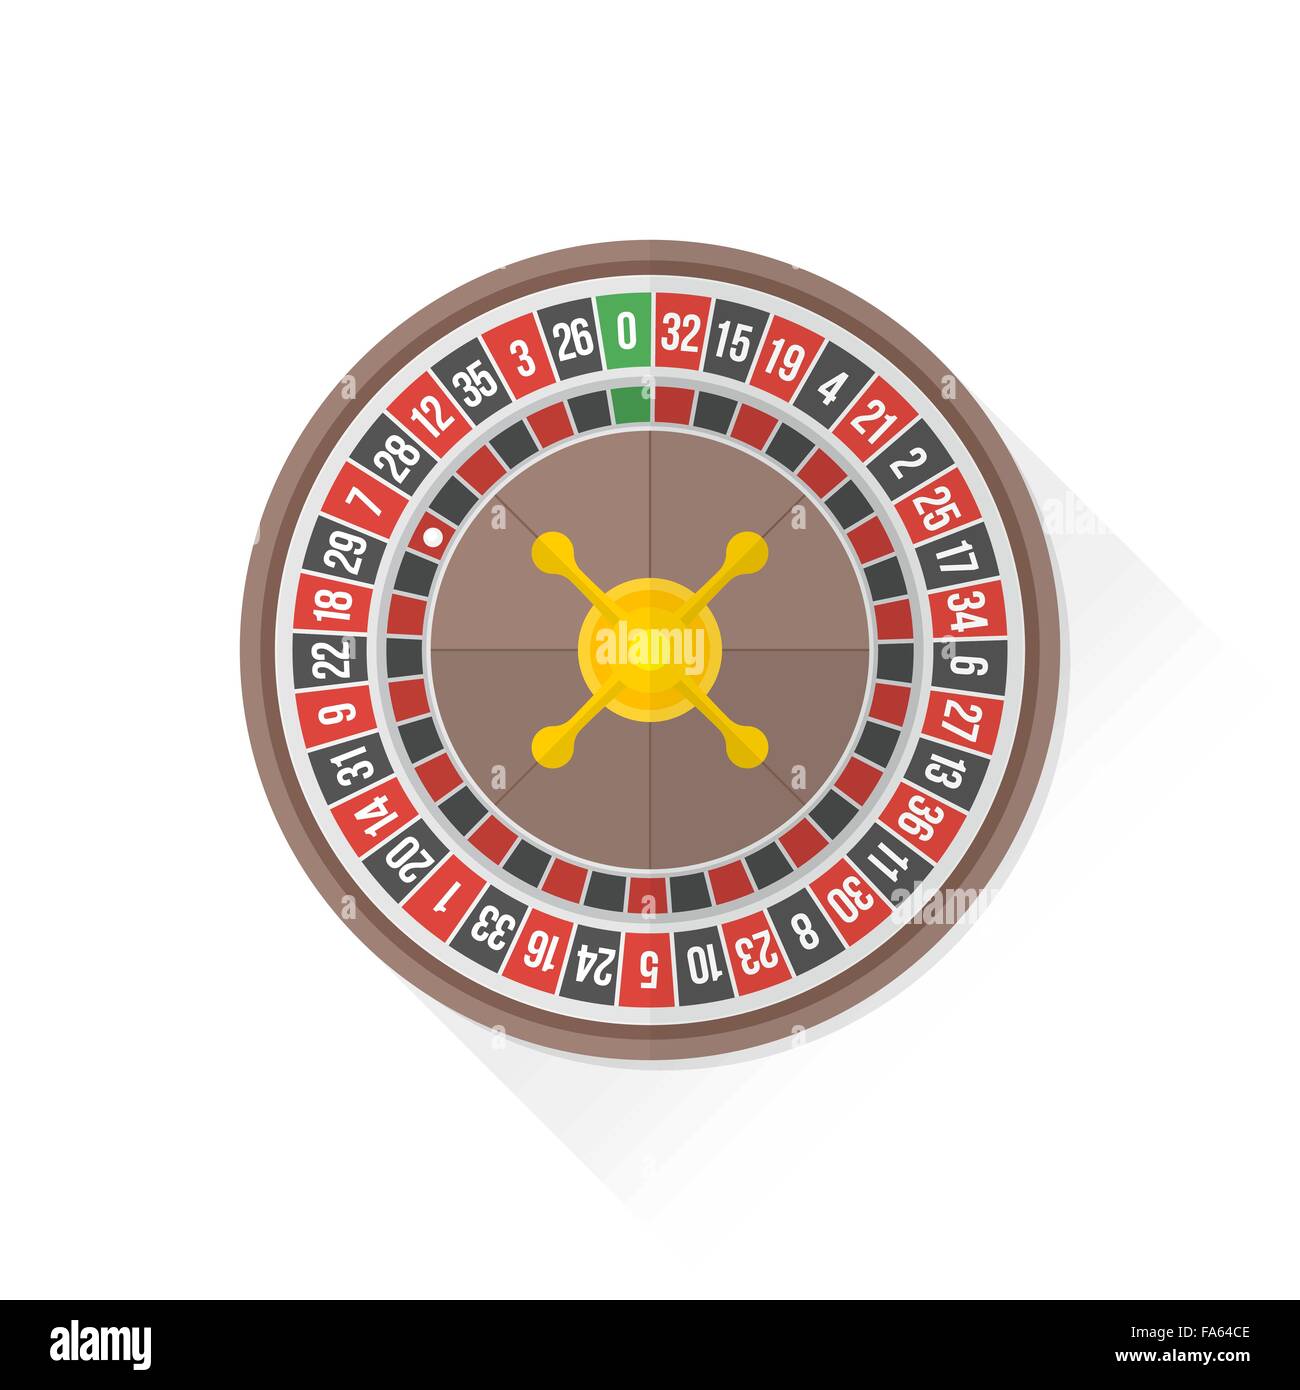 Roulette Cut Out Stock Images & Pictures - Alamy